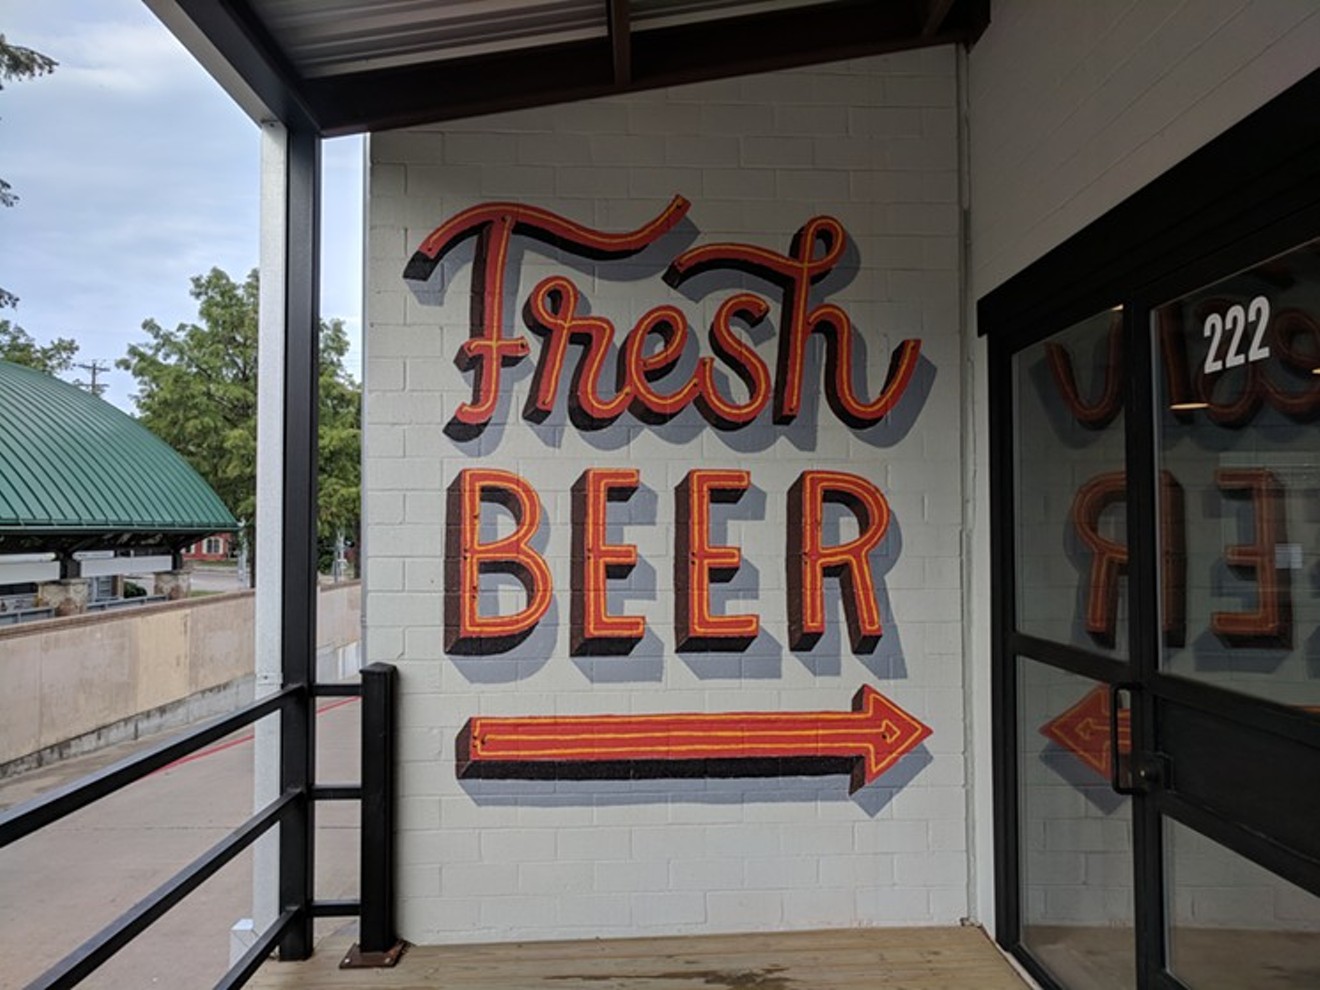 Heads up, Oak Cliff: Your first craft brewery celebrates its grand opening this weekend.